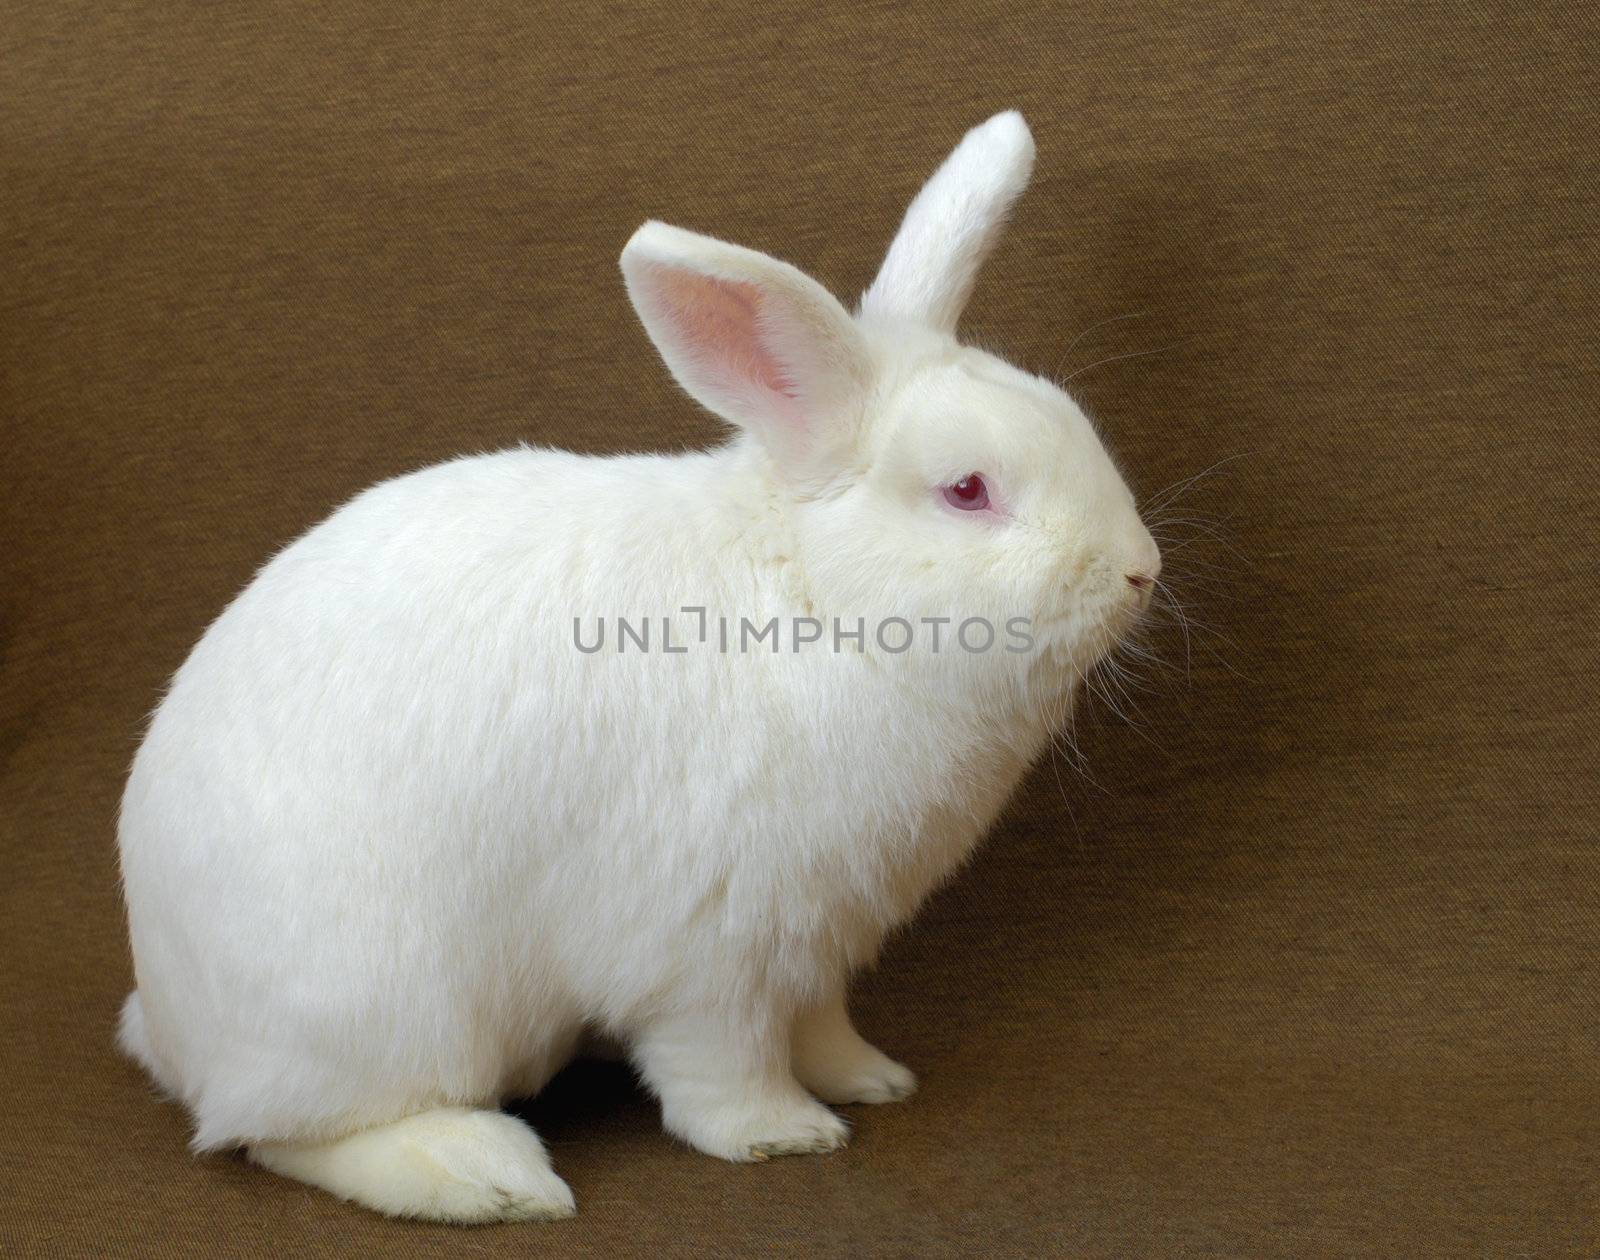 A large New Zealand White rabbit (albino) on a plain brown background.